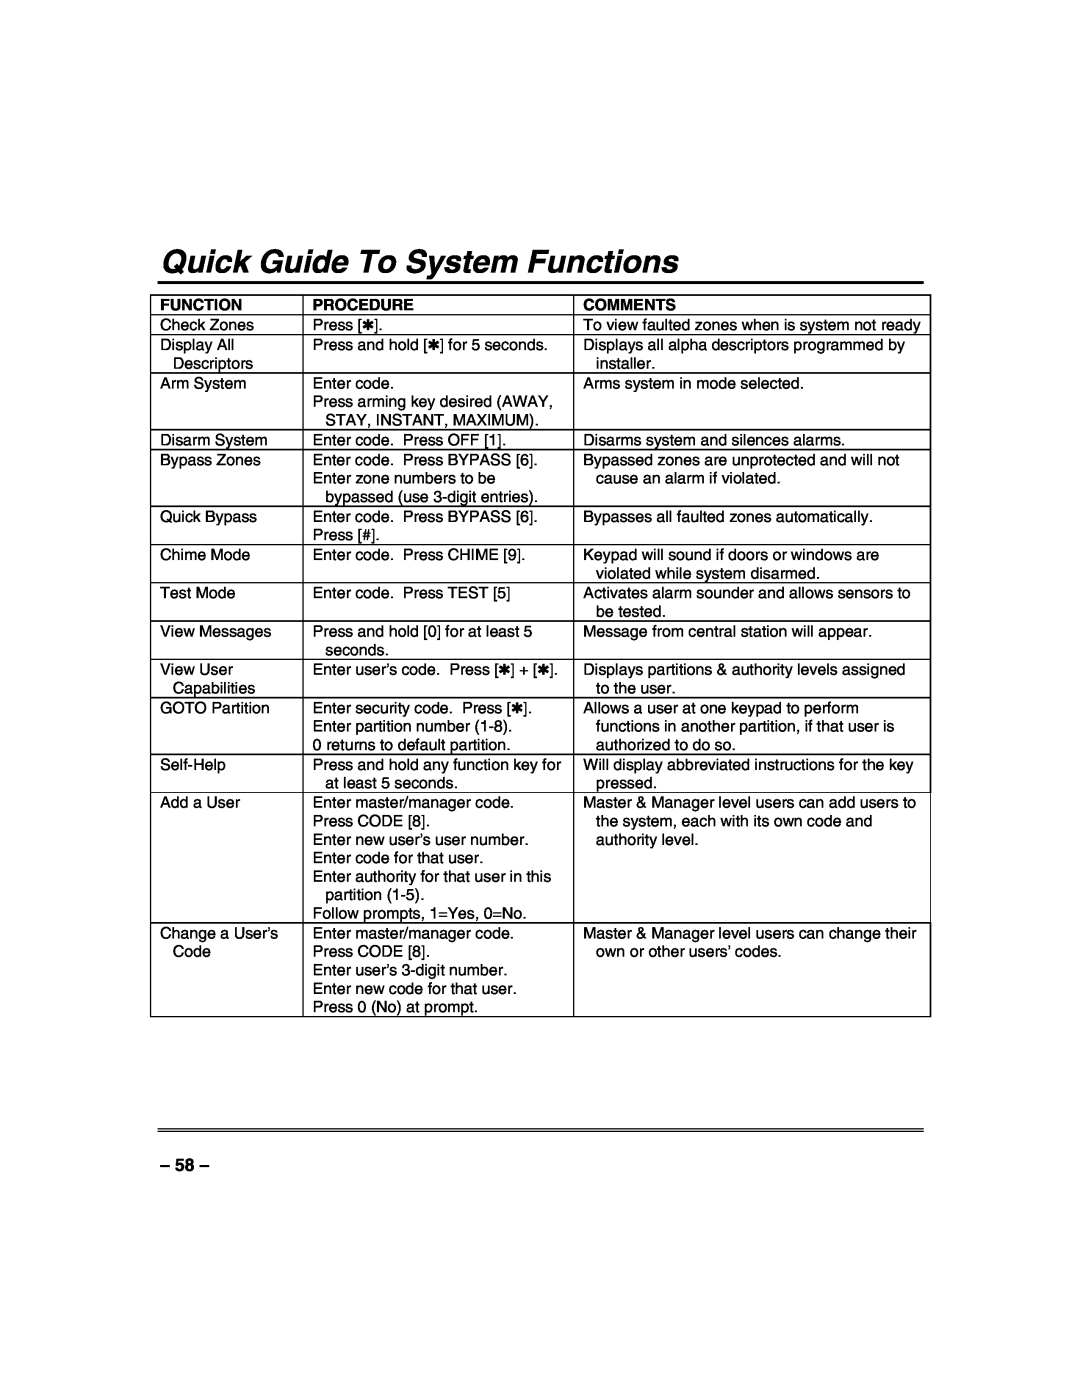 Honeywell VISTA-50PUL manual Quick Guide To System Functions, Procedure, Comments 